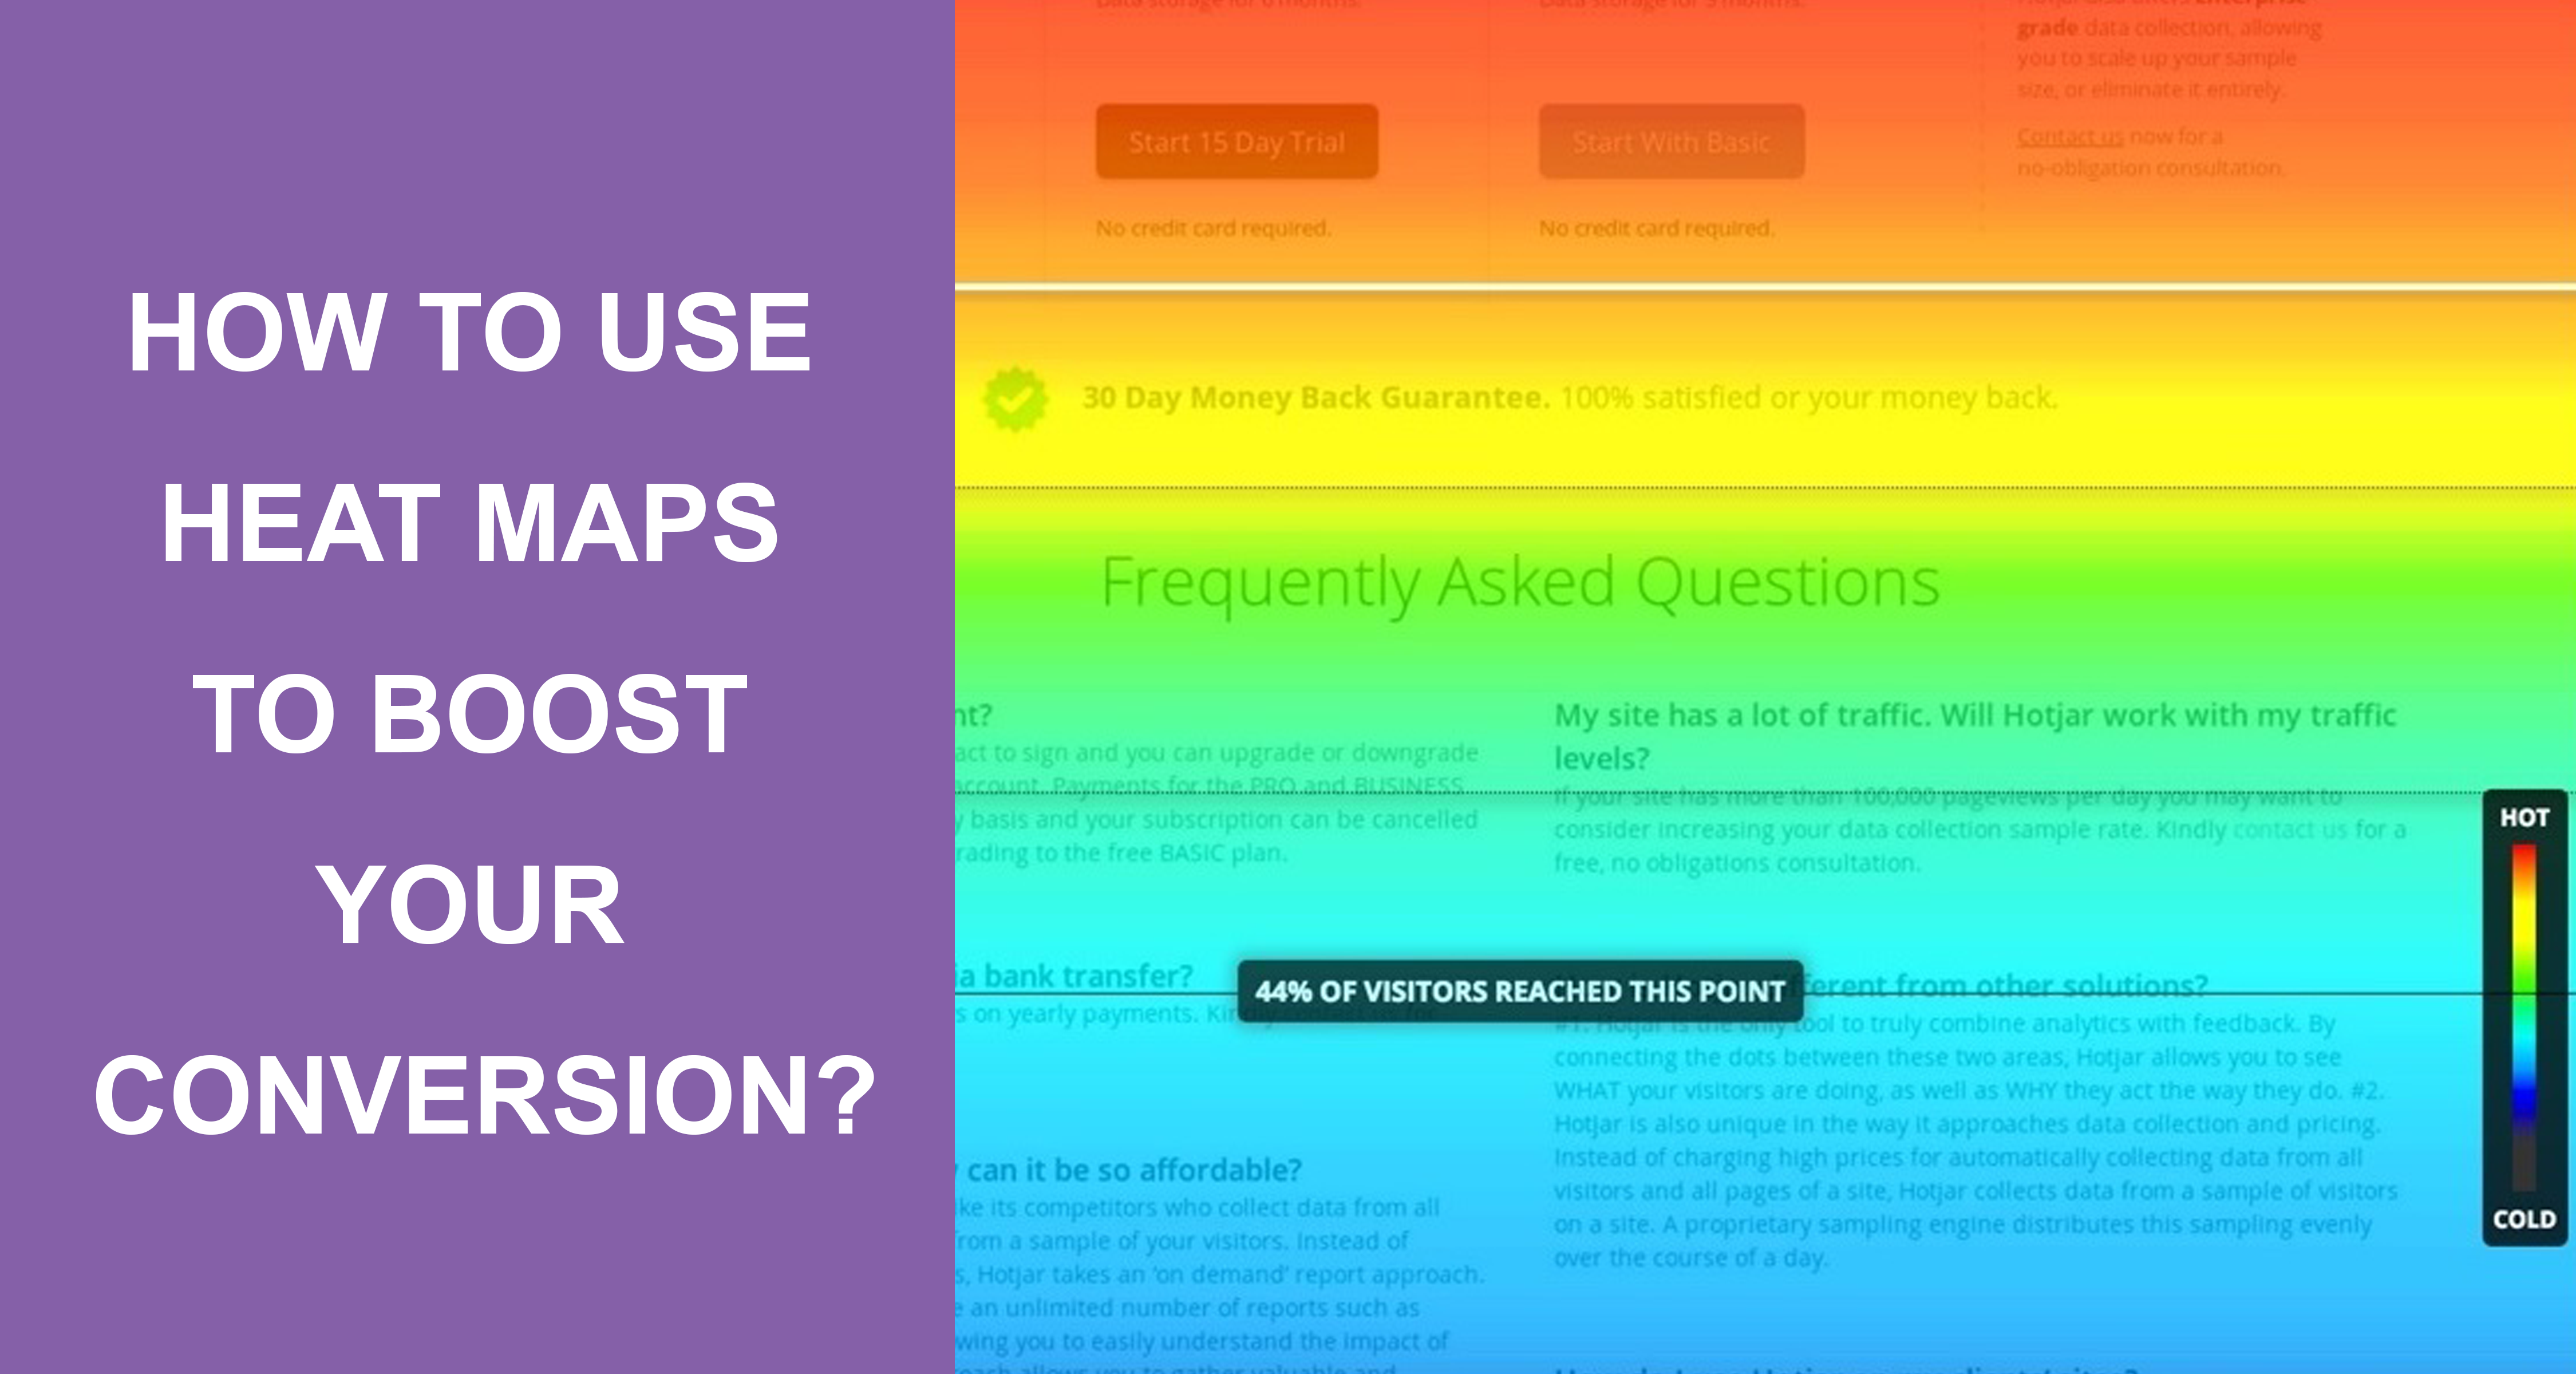 How To Use Heat Maps To Boost Your Conversion